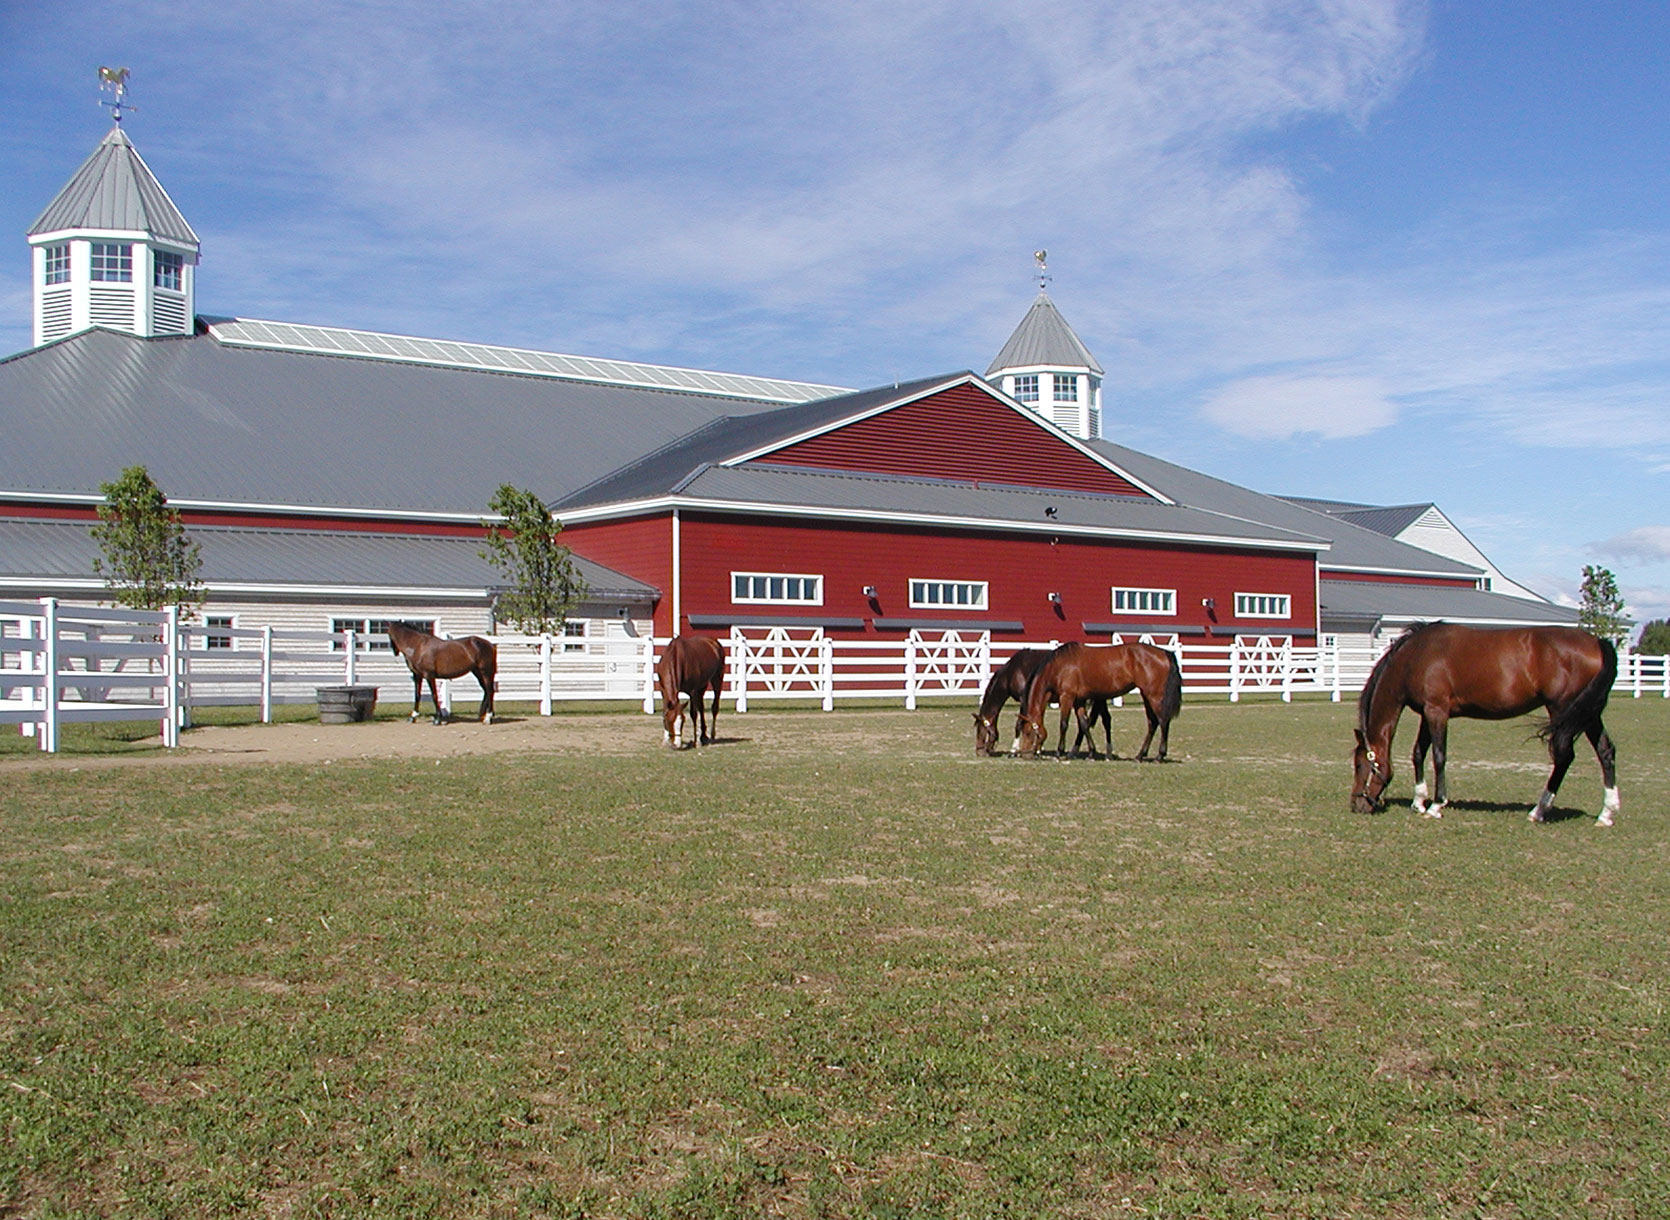 Horses and equestrian center